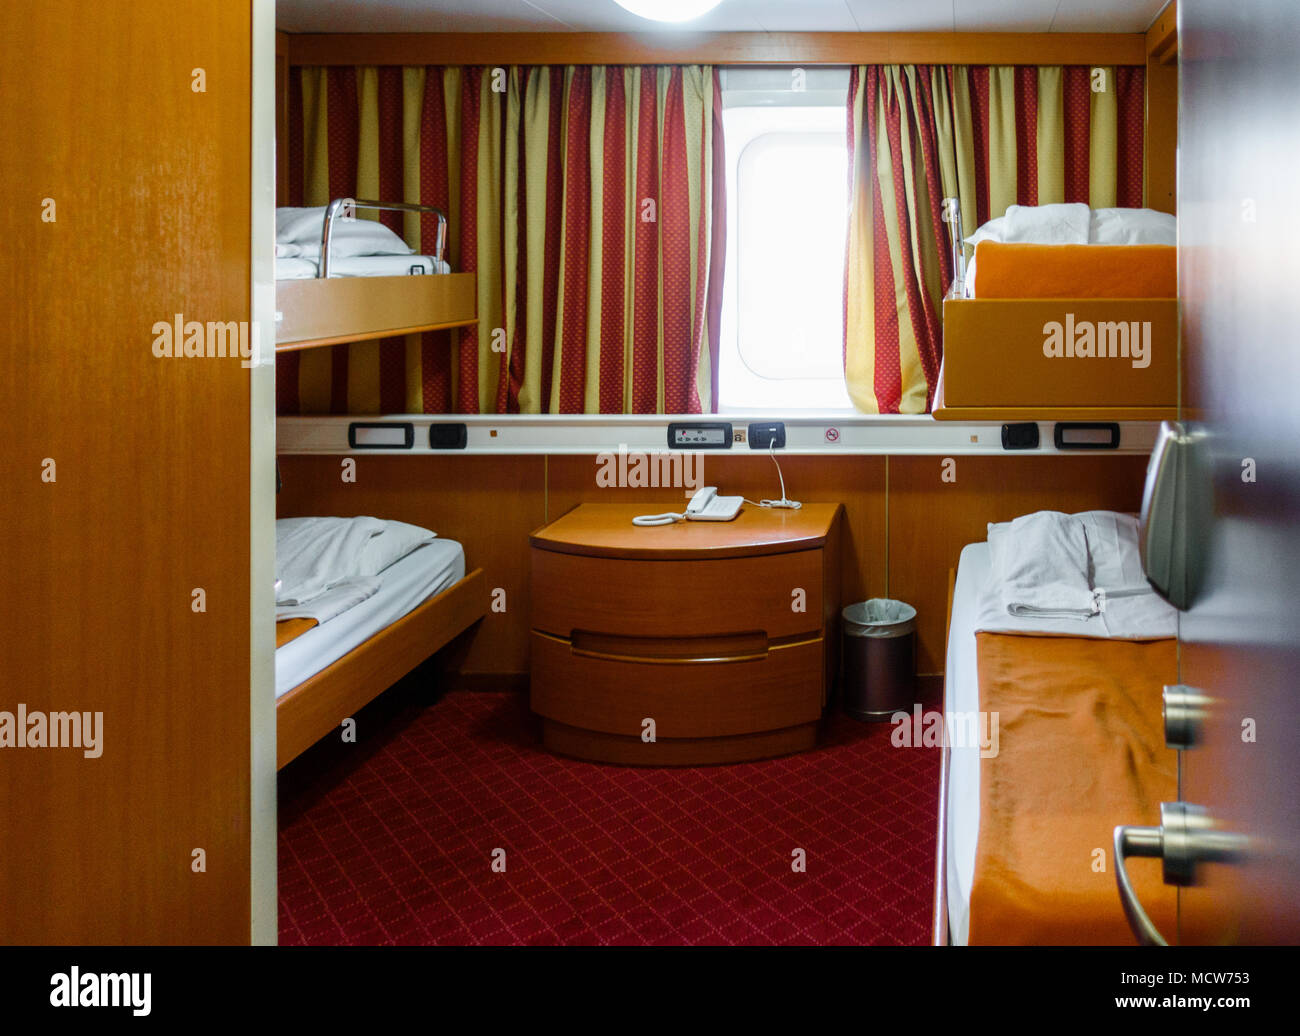 Interiors of business travel compartment with high section and low section in a train, Athens, Greece Stock Photo